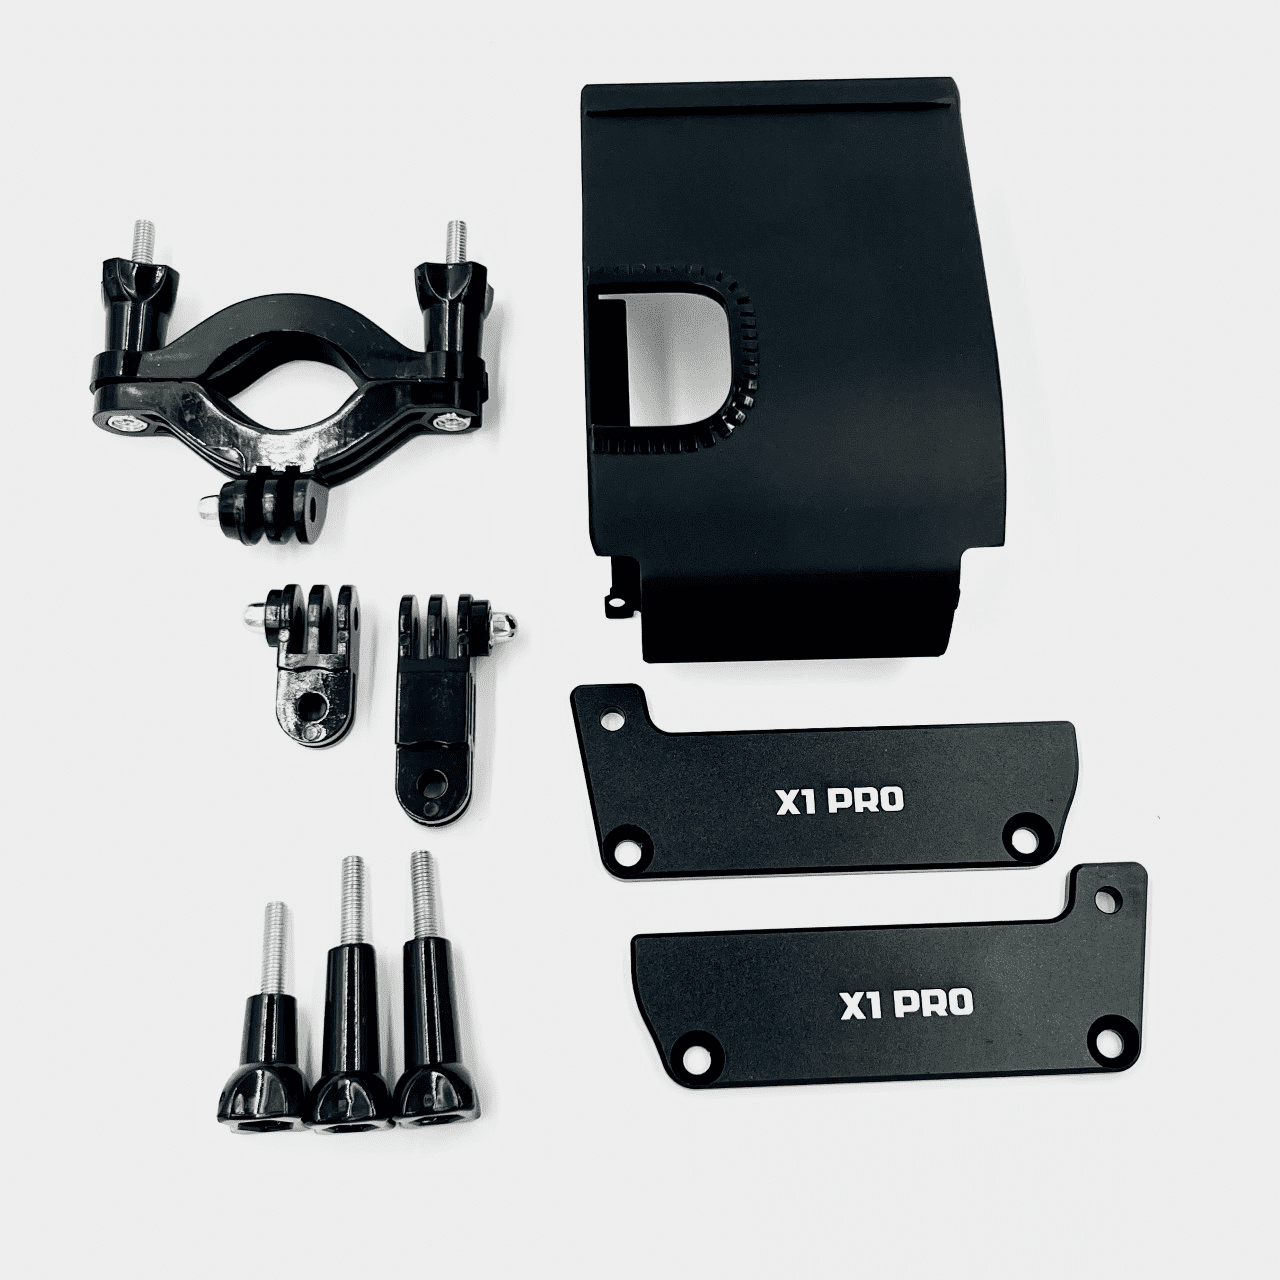 A set of parts for the camera and accessories.